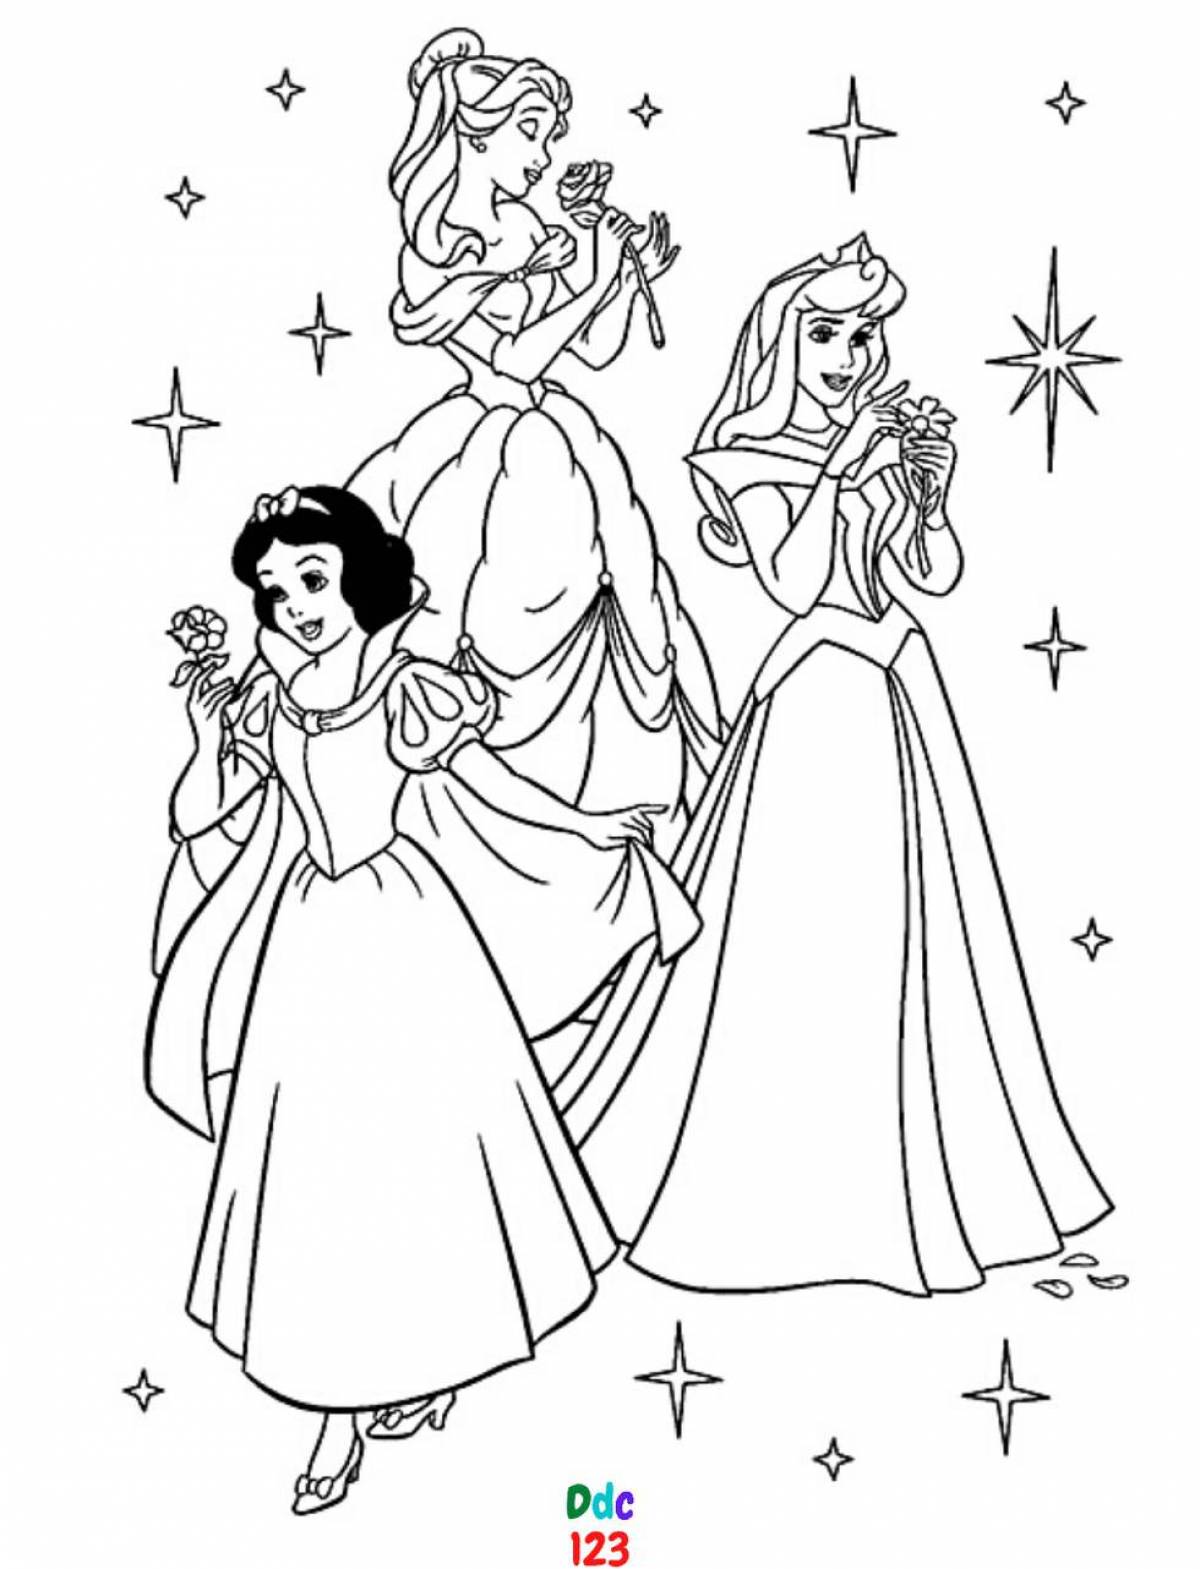 Glowing princess coloring pages for kids